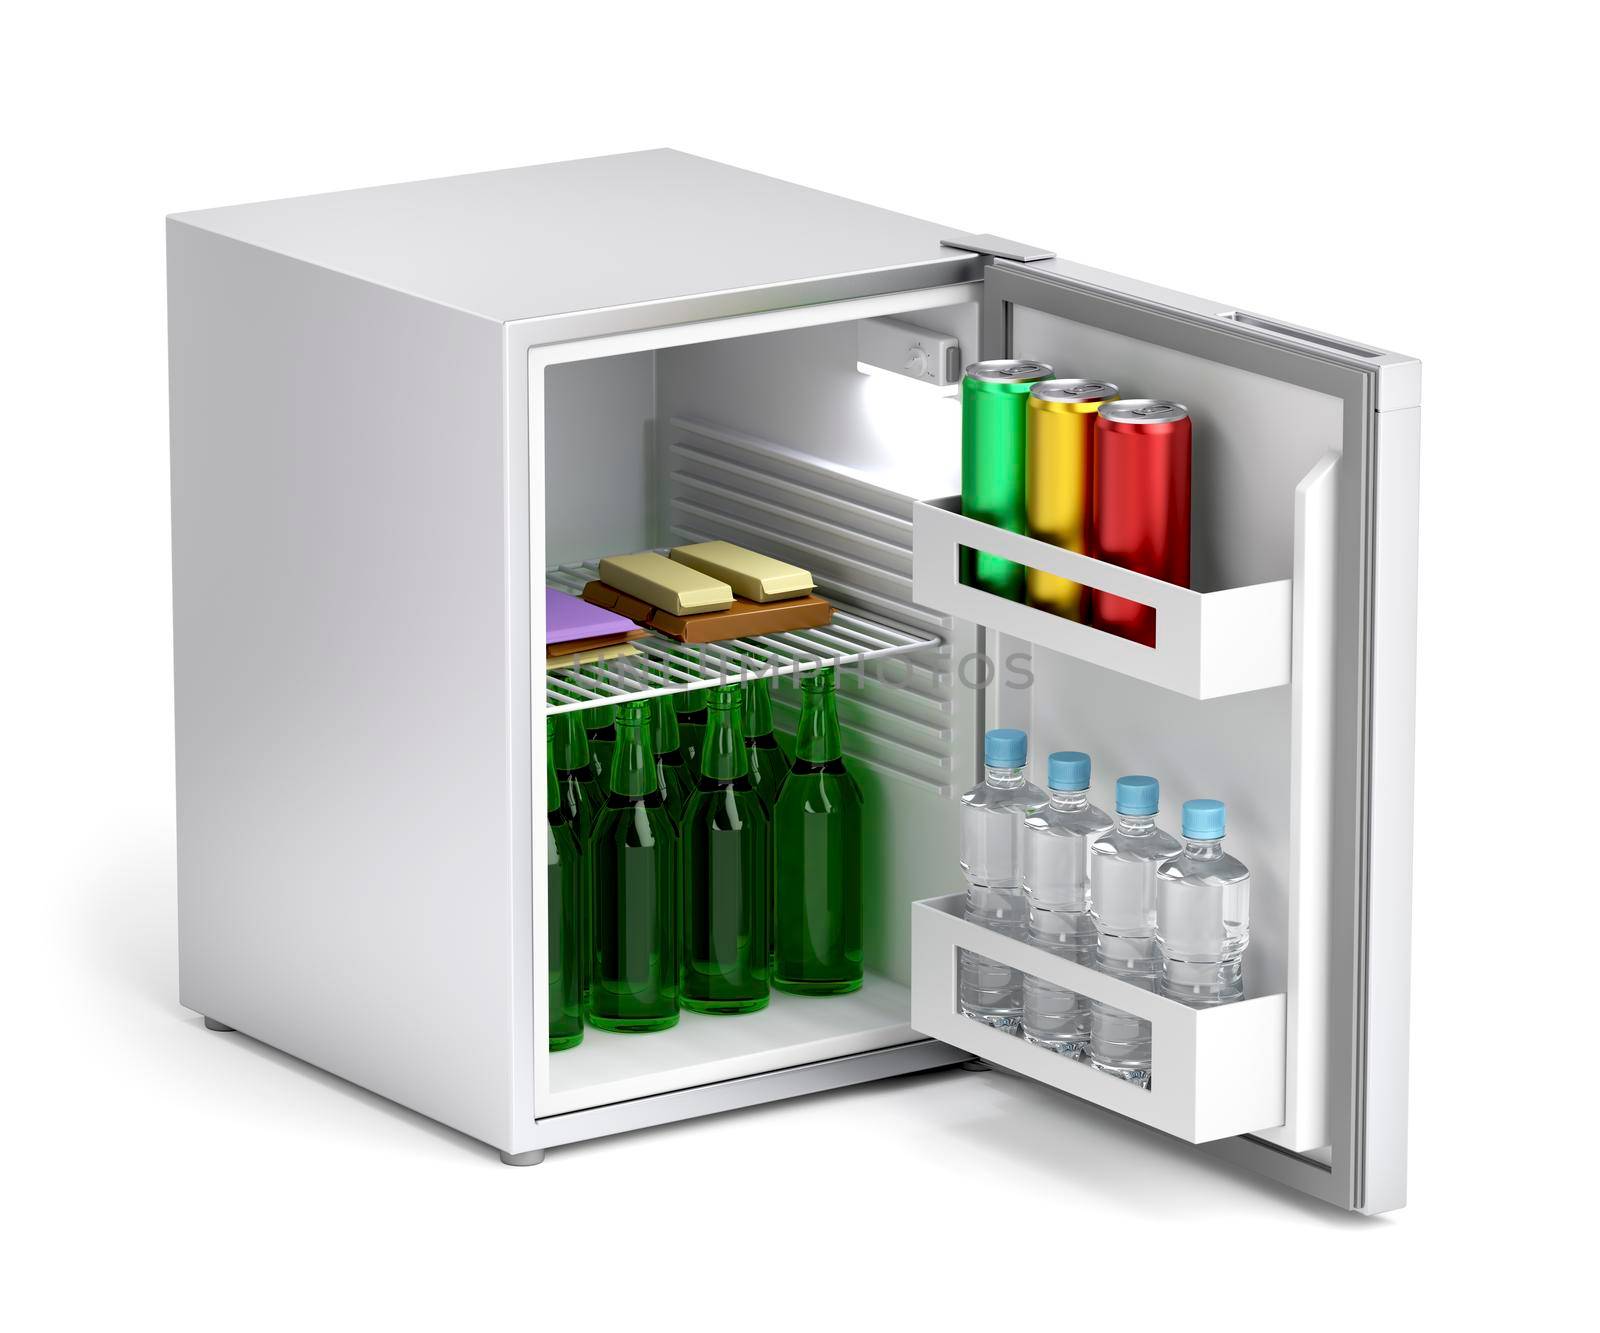 Minibar refrigerator with drinks and snacks by magraphics